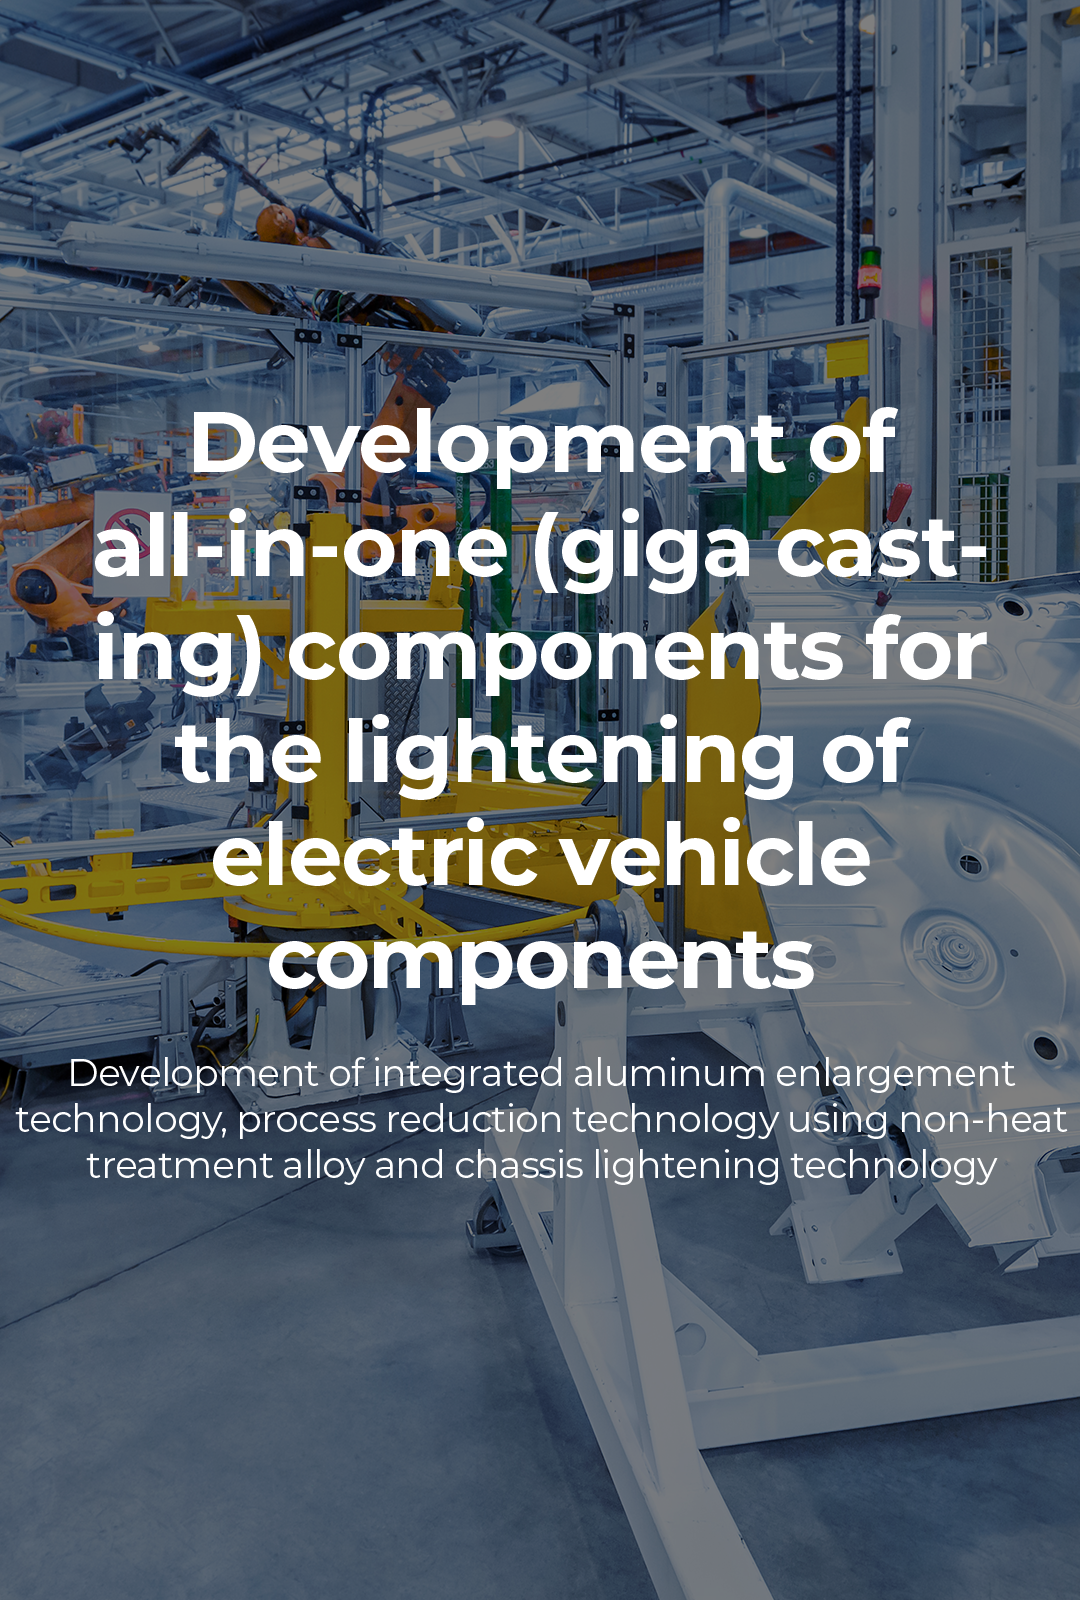 Development of all-in-one (giga casting) components for the lightening of electric vehicle components